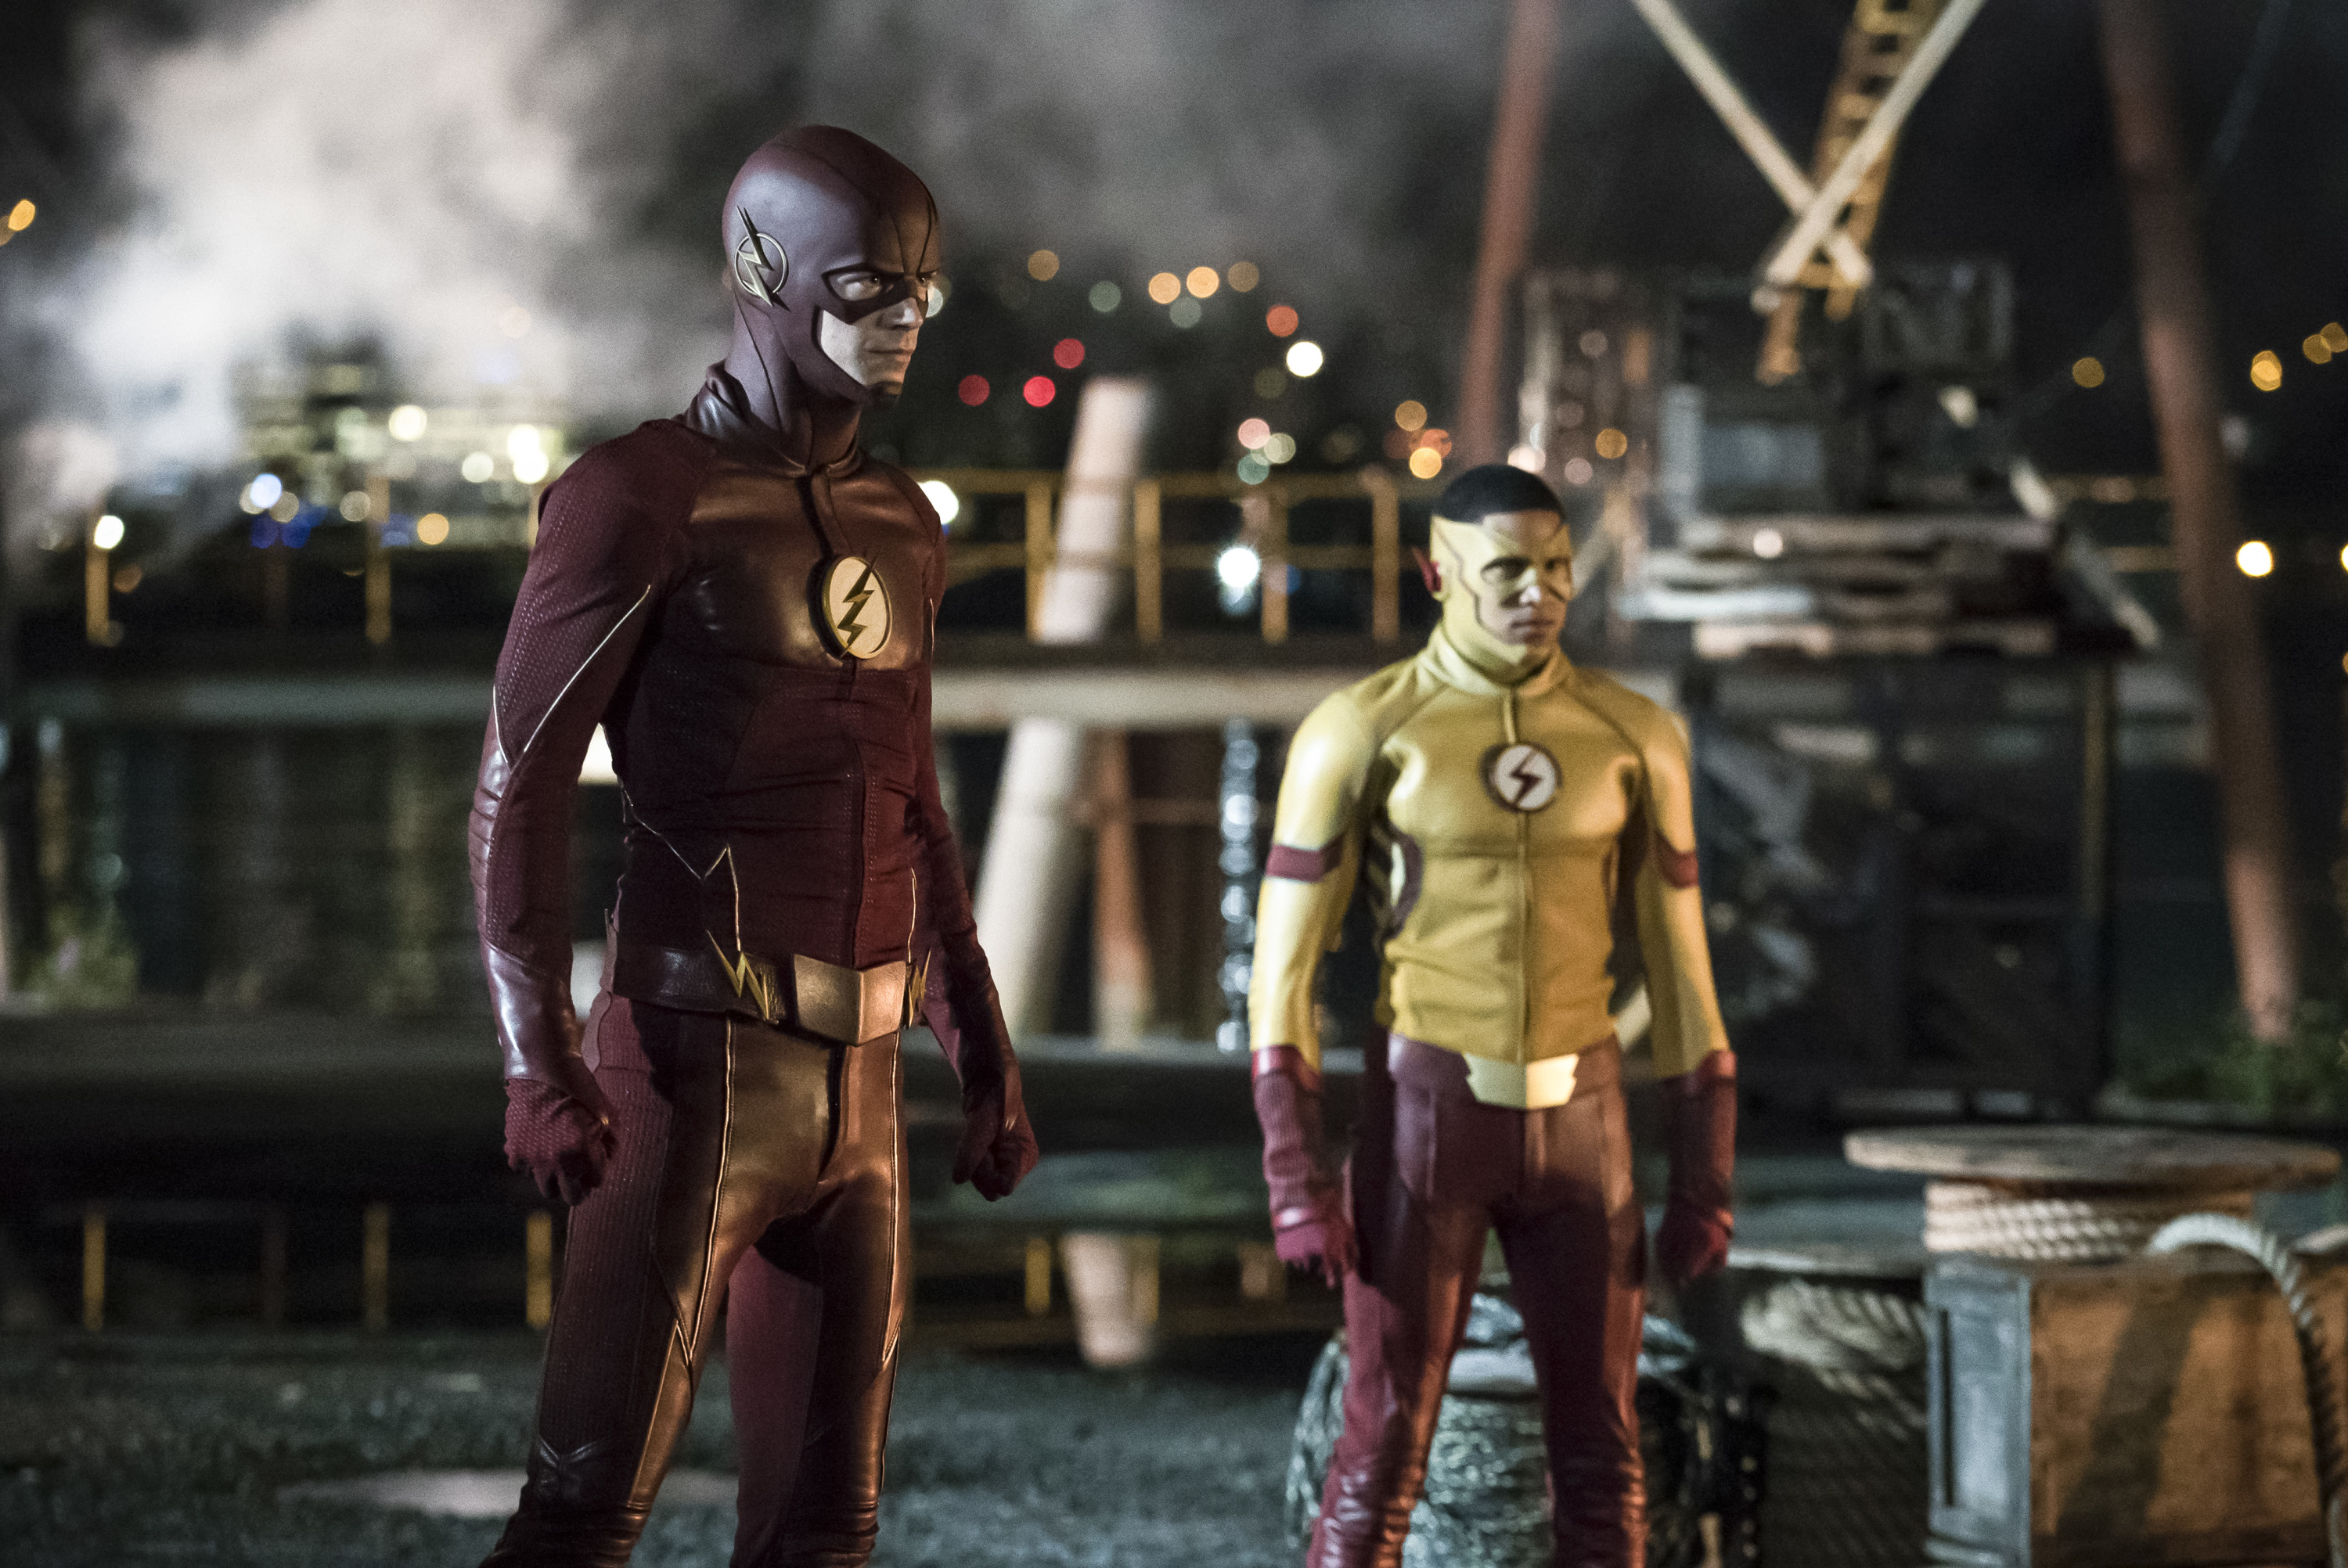 Grant Gustin as The Flash and Keiynan Lonsdale as Kid Flash. 